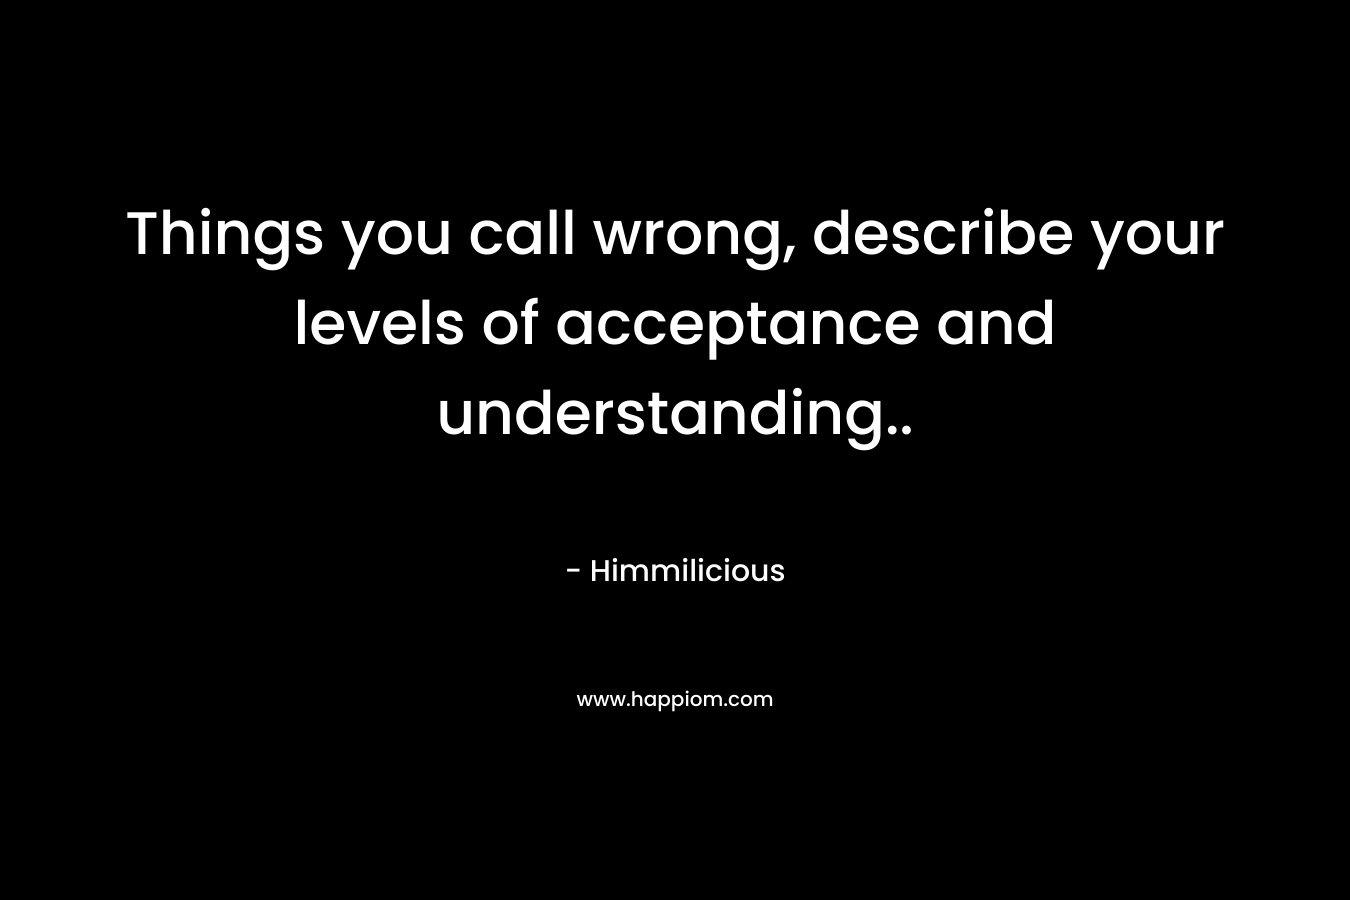 Things you call wrong, describe your levels of acceptance and understanding..